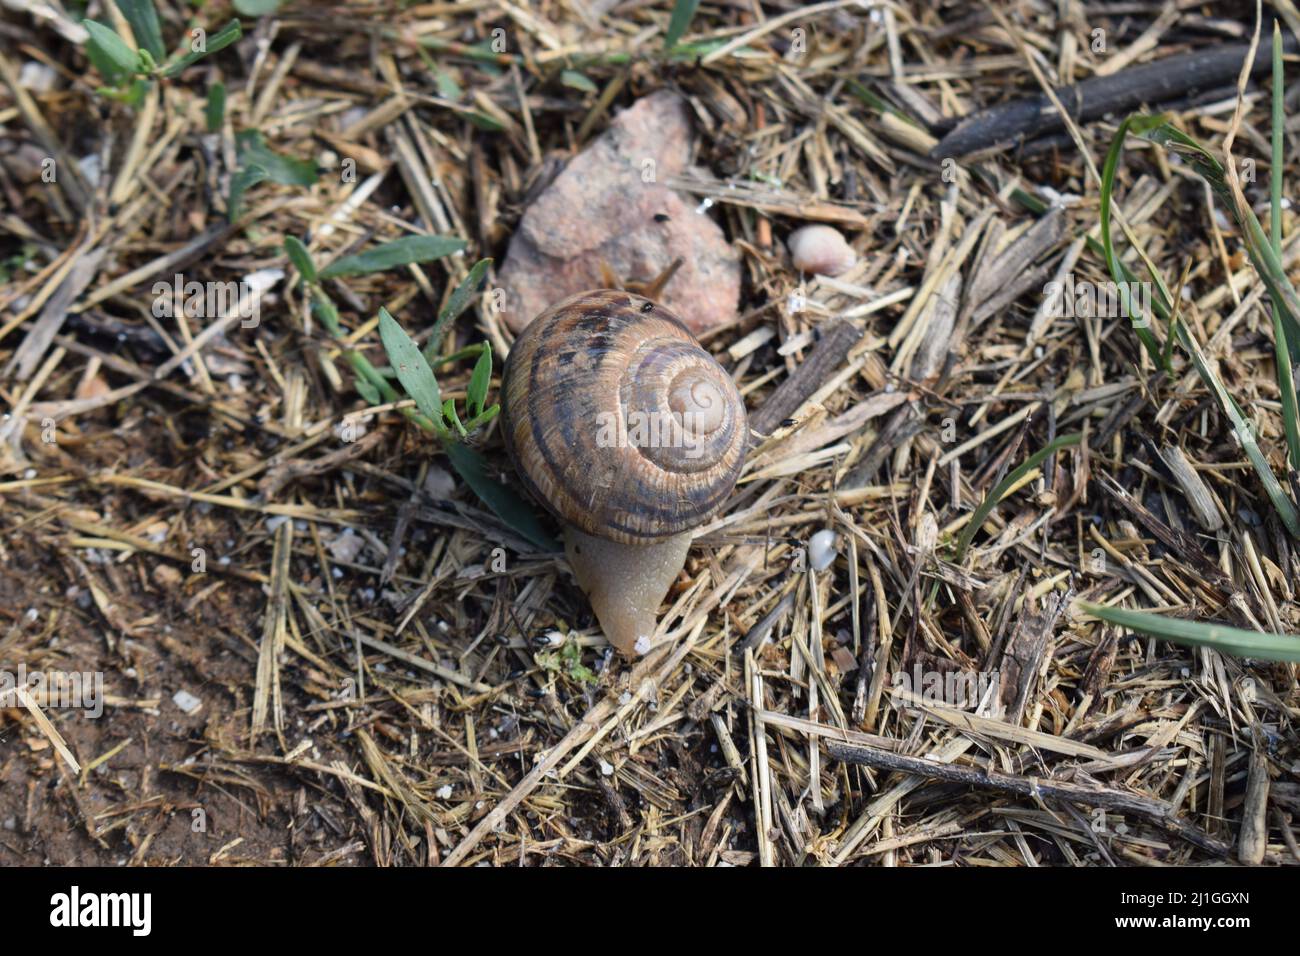 Close-up of a large snail, with a snail shell, crawling. Snail animal life in nature on the green grass. It is crawling find some food. Background and Stock Photo